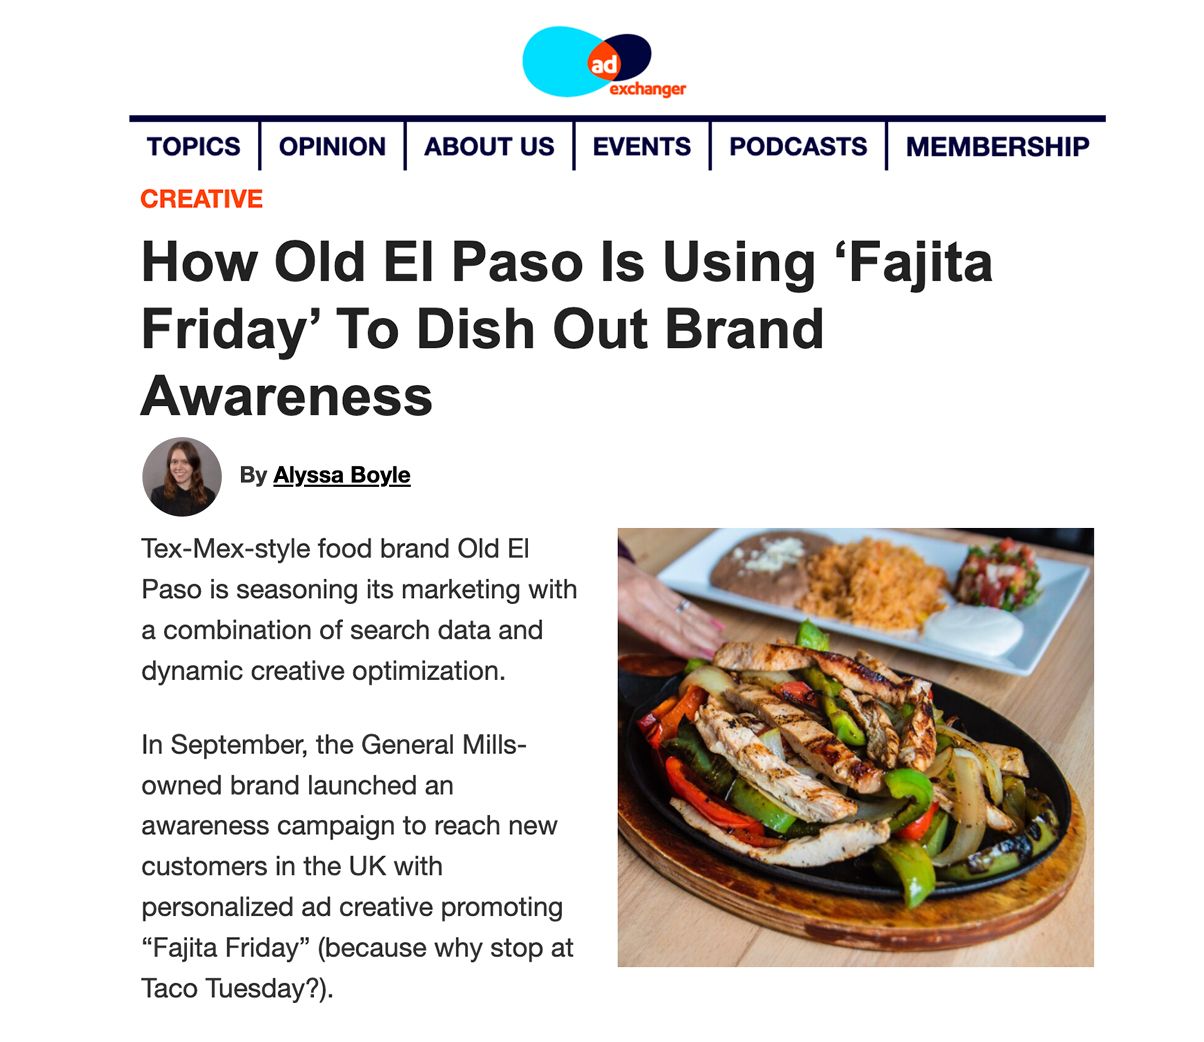 AdExchanger: How Old El Paso Is Using ‘Fajita Friday’ To Dish Out Brand Awareness